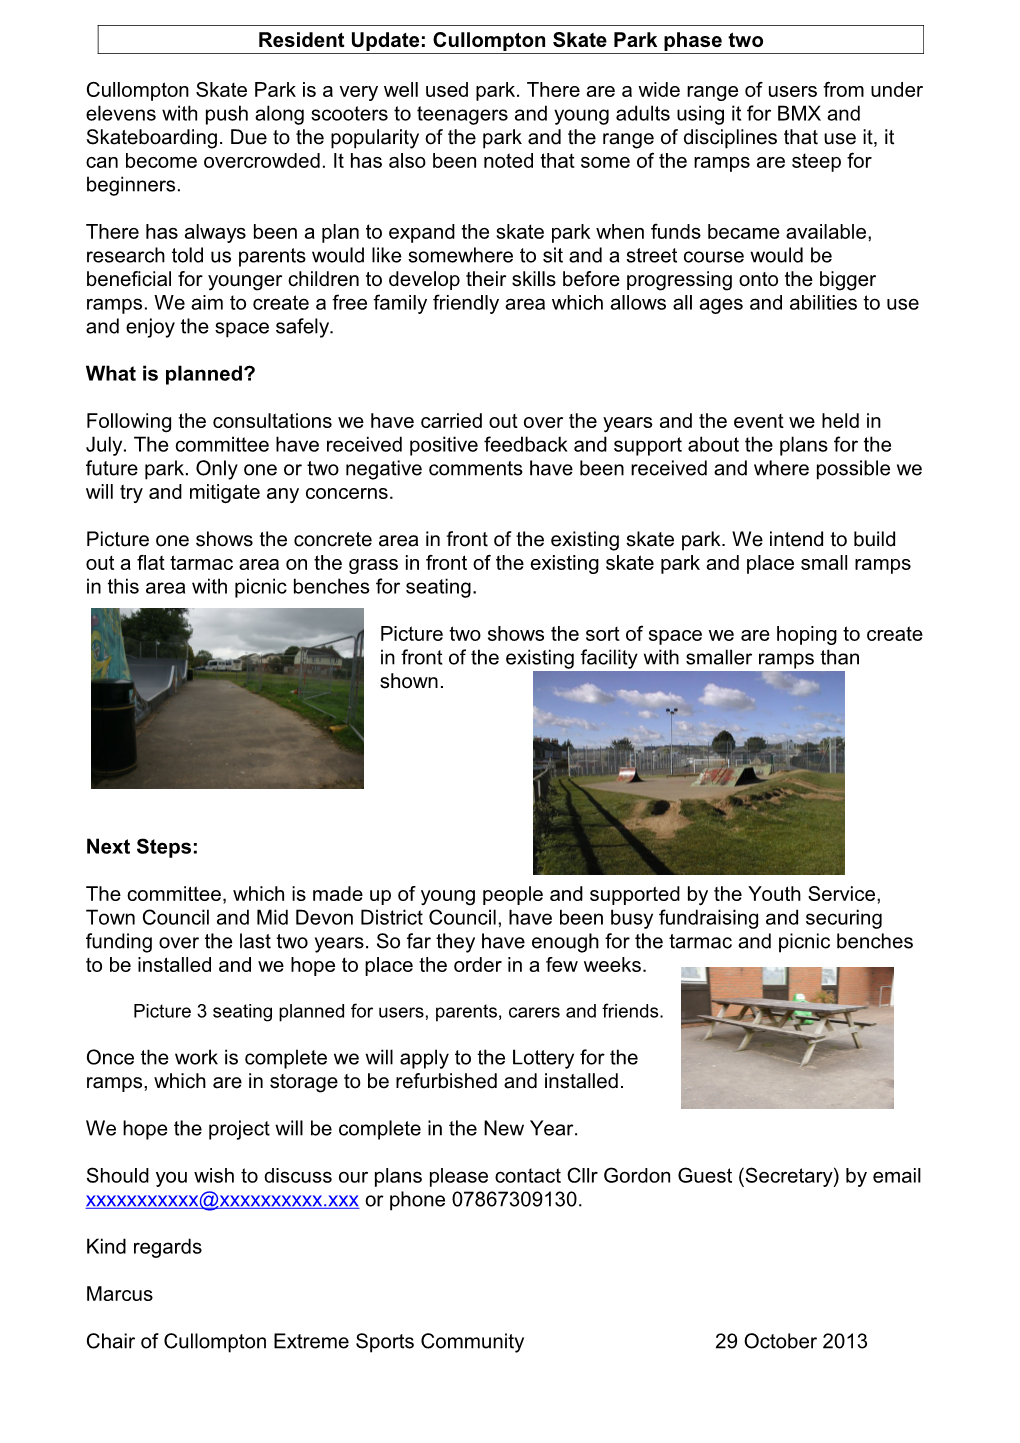 Resident Update: Cullompton Skate Park Phase Two